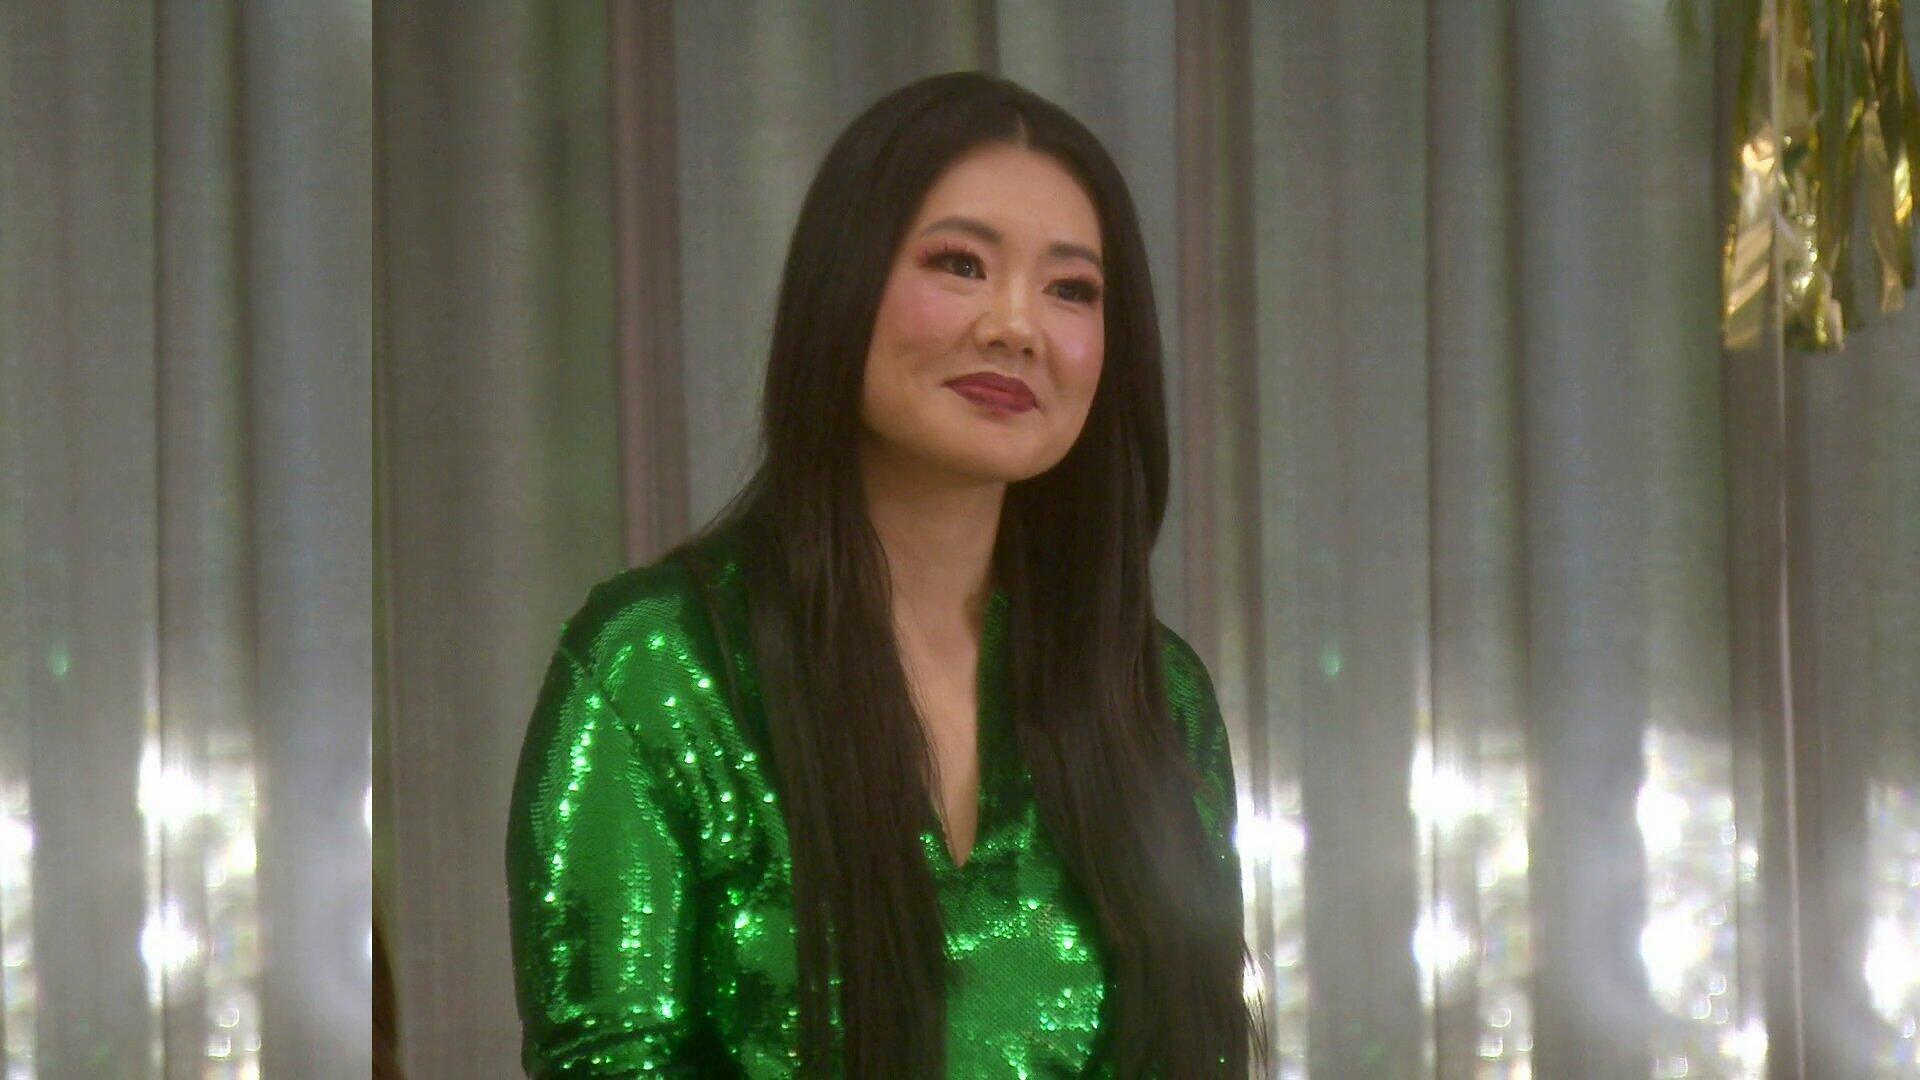 Crystal Kung Minkoff - The Real Housewives of Beverly Hills | Season 12 Episode 11 | Crystal Kung Minkoff style